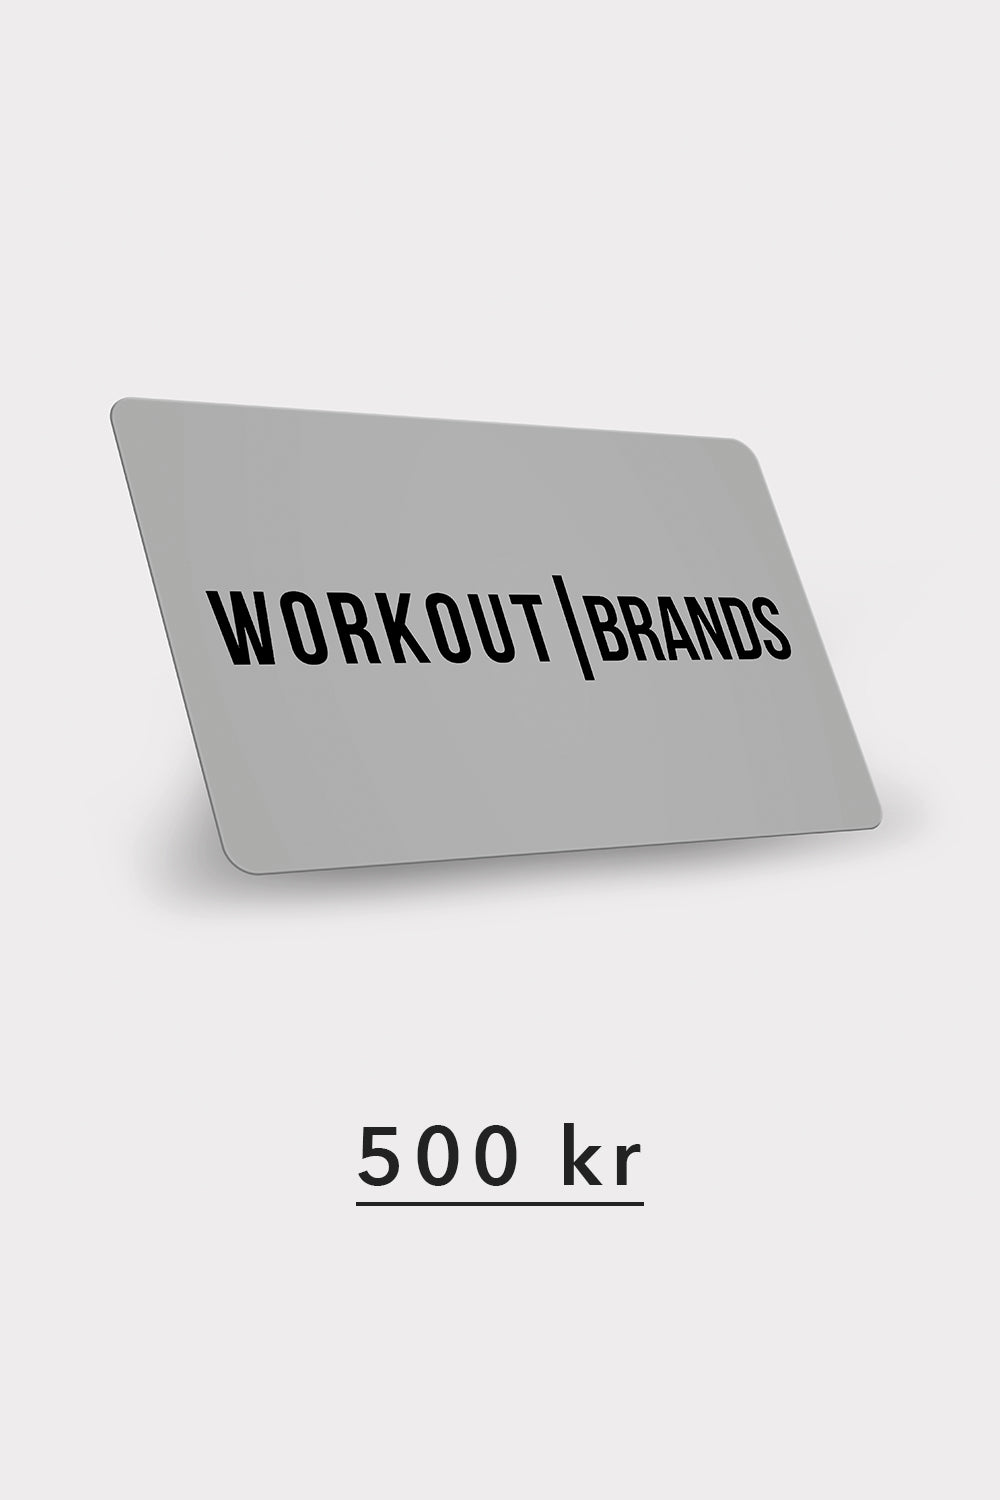 Gift Card Workout Brands